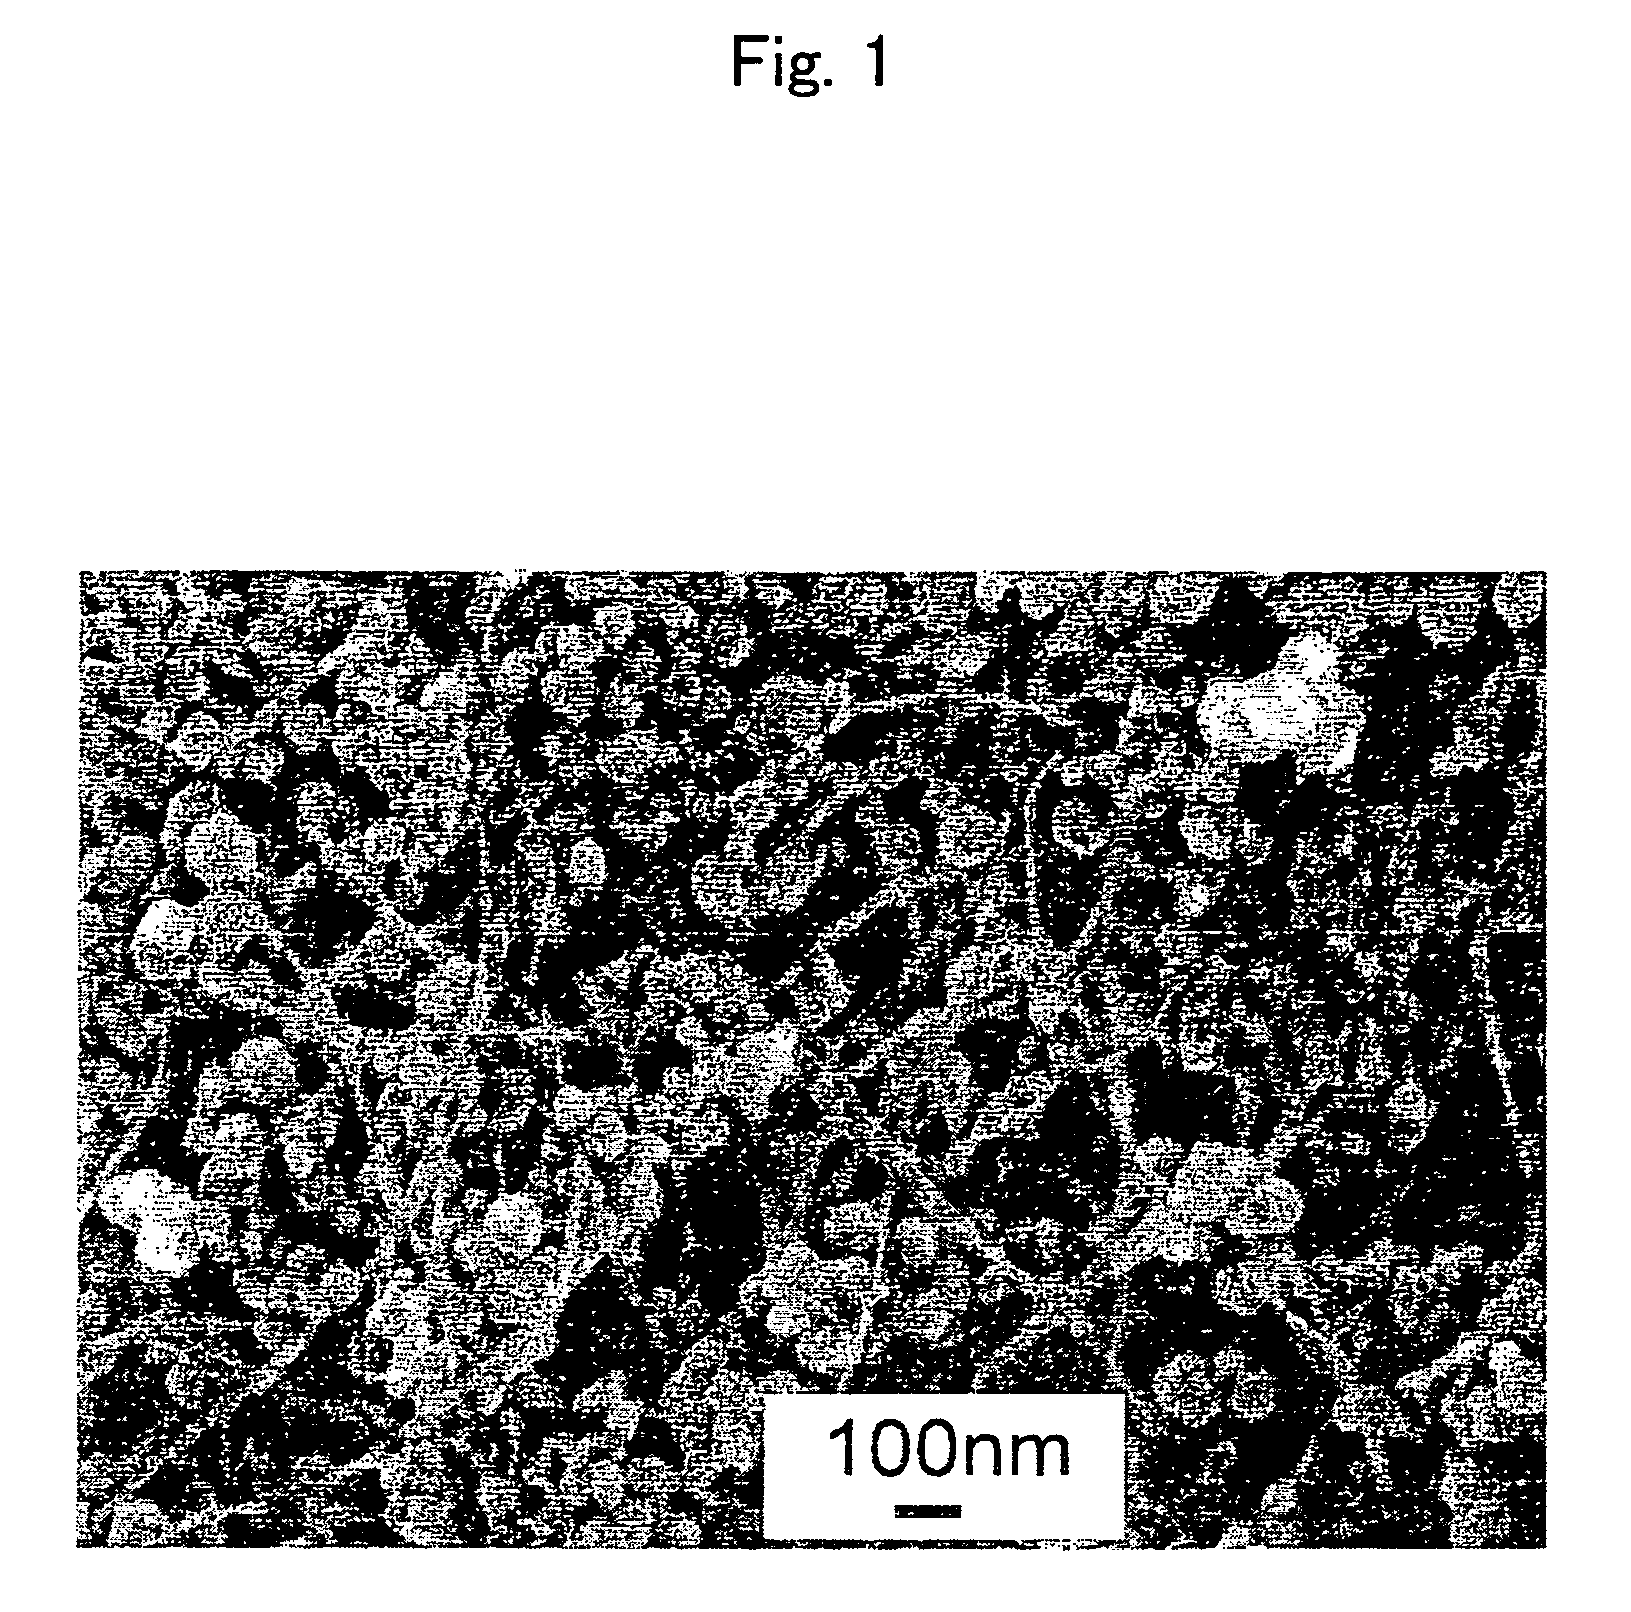 Carbon nanotube-carbon nanohorn complex and method for producing the same